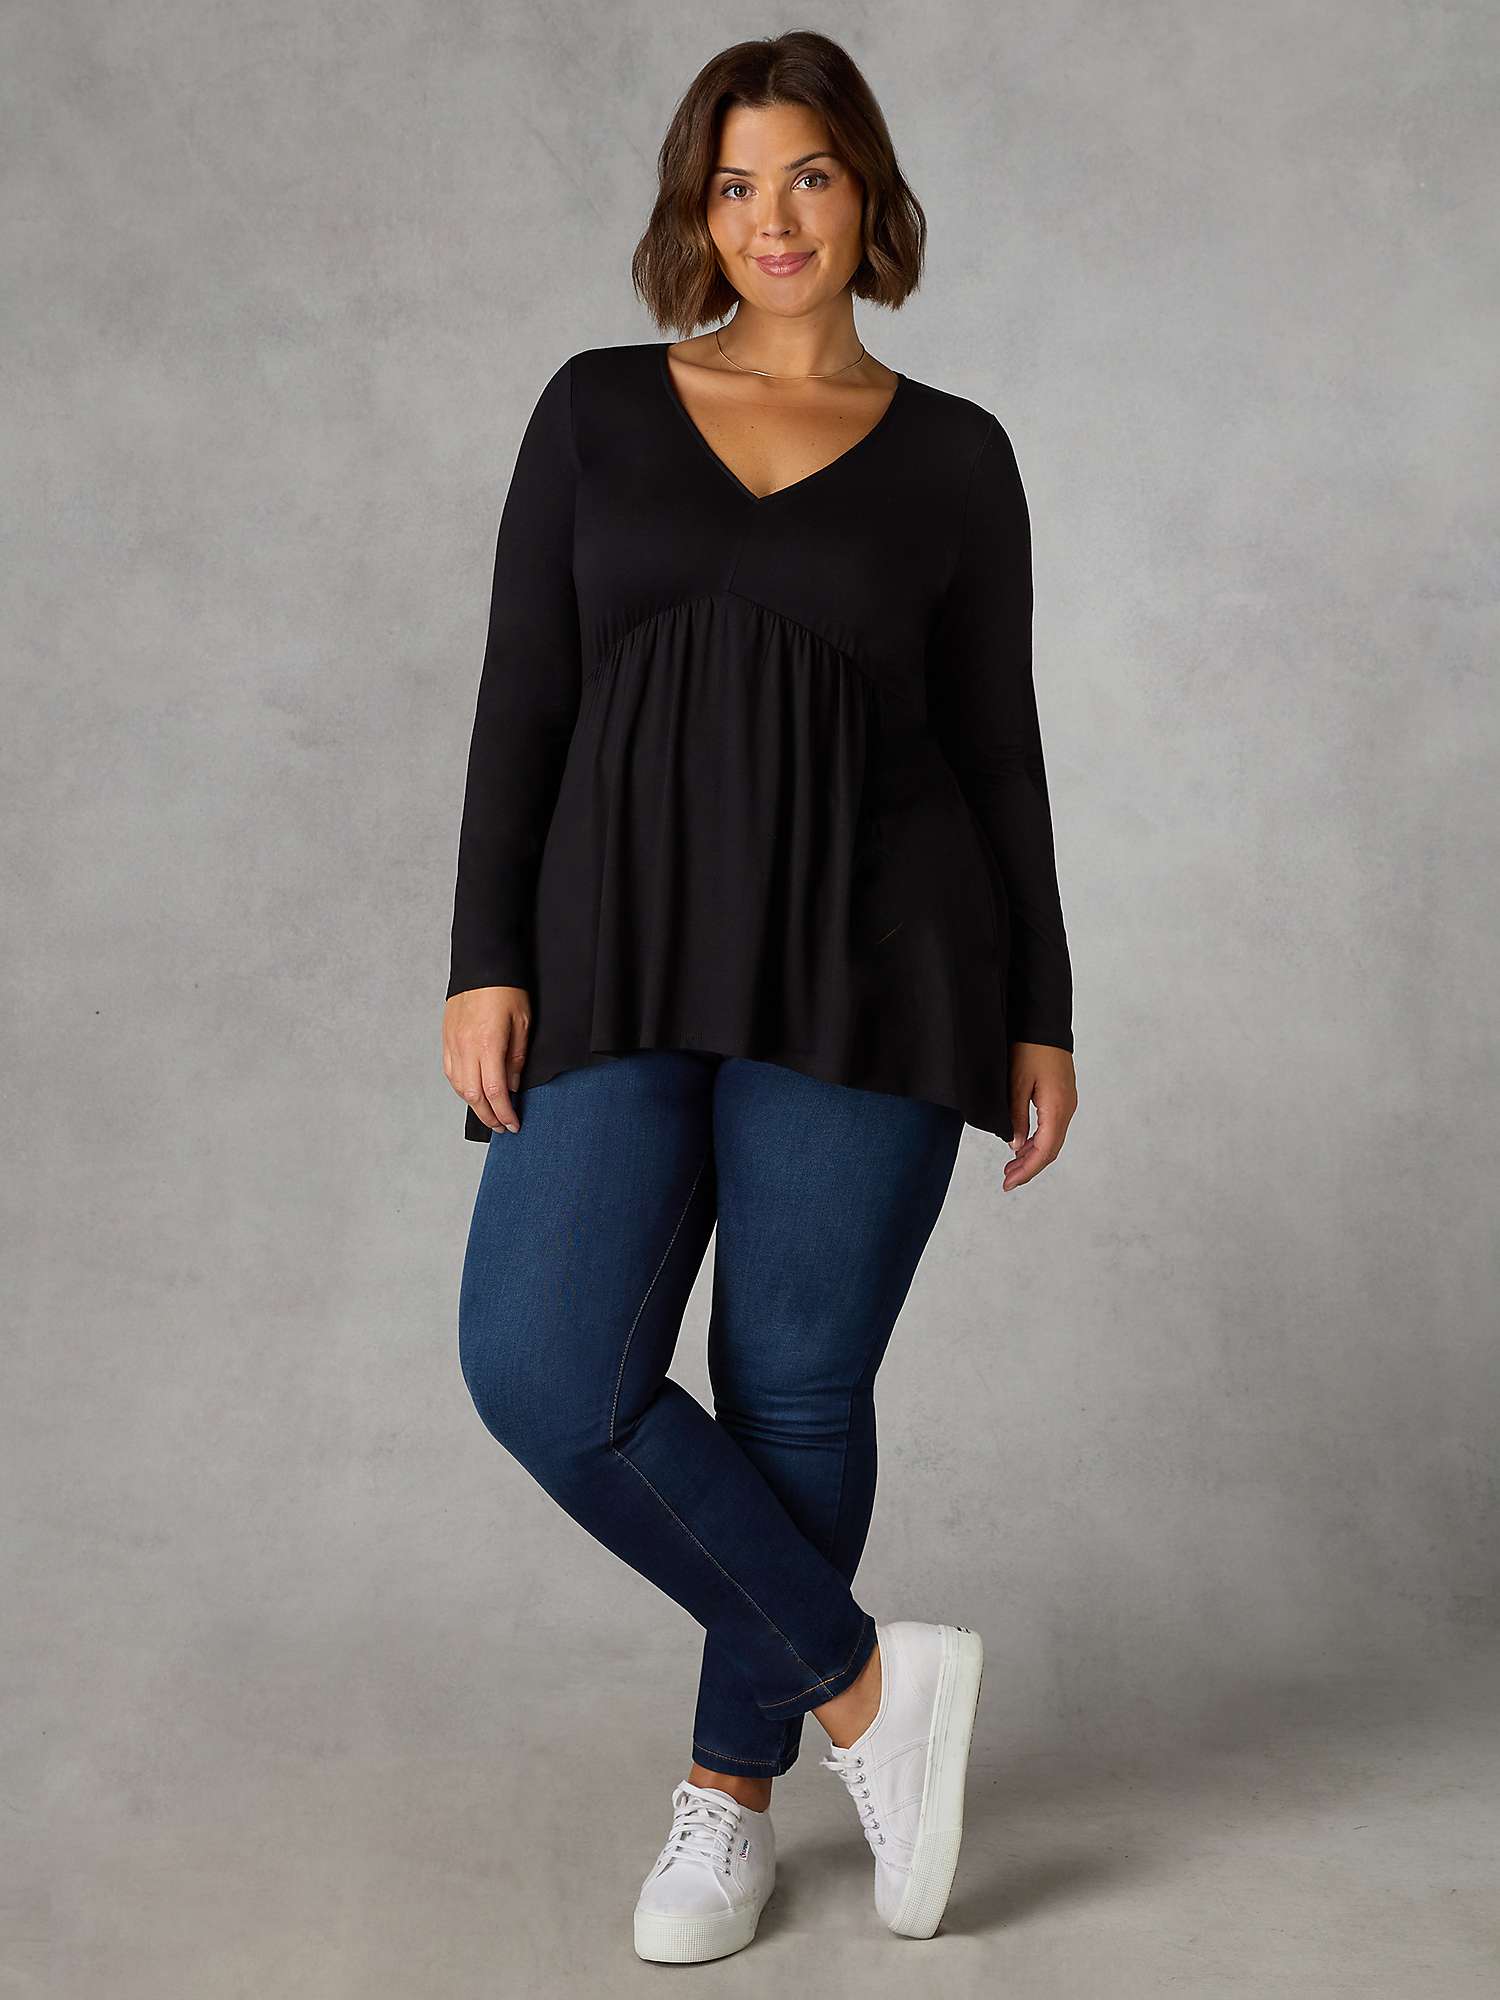 Buy Live Unlimited Curve Jersey Empire Seam Top, Black Online at johnlewis.com